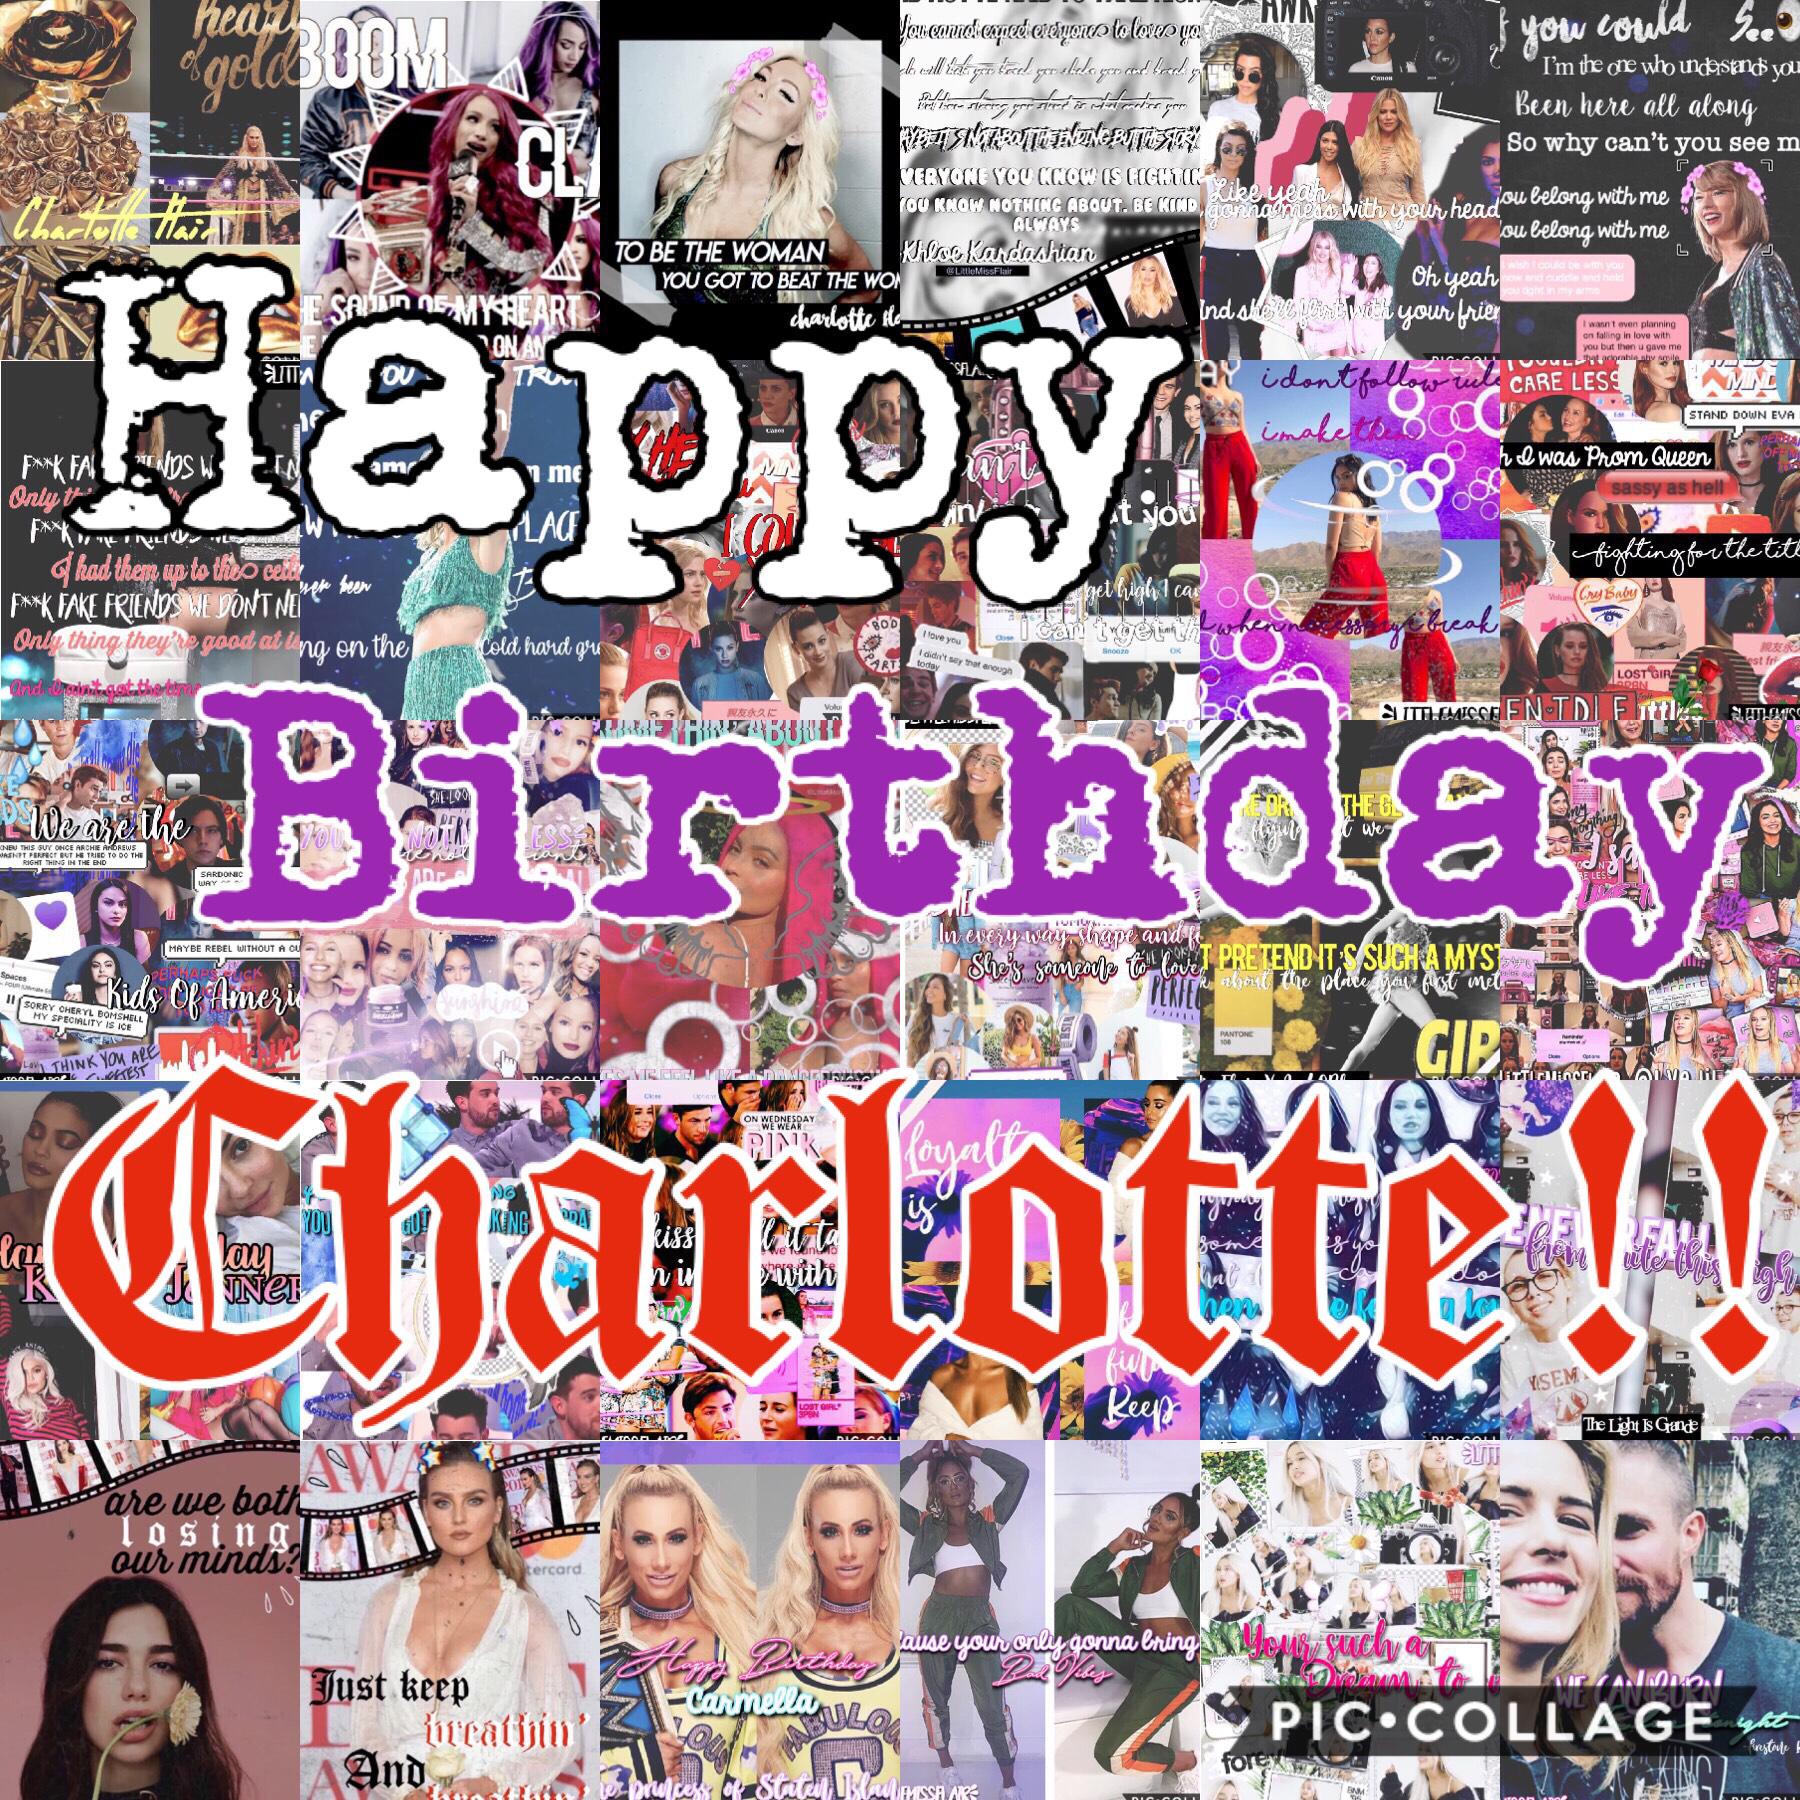 Happy Birthday Charlotte! You are amazing and I hope you have the best day ever xo! ♥️♥️♥️